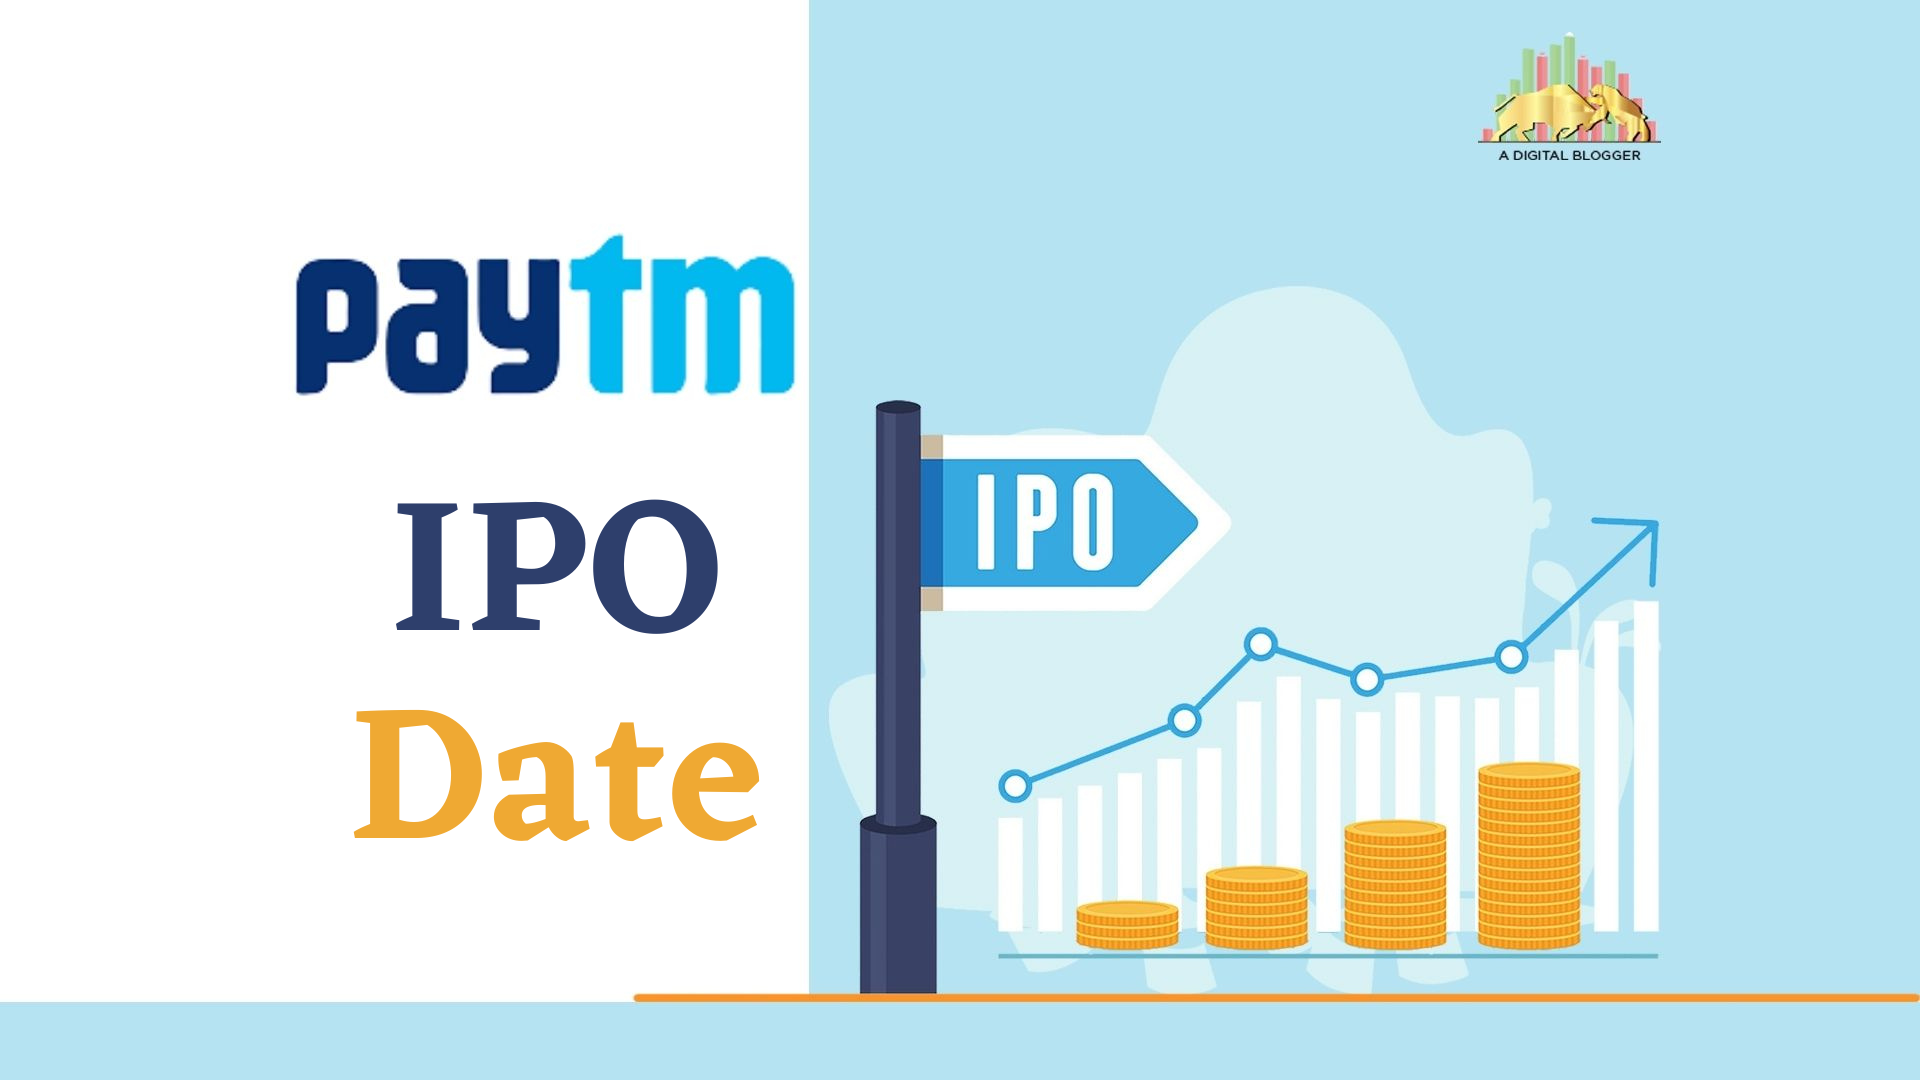 Paytm IPO Date